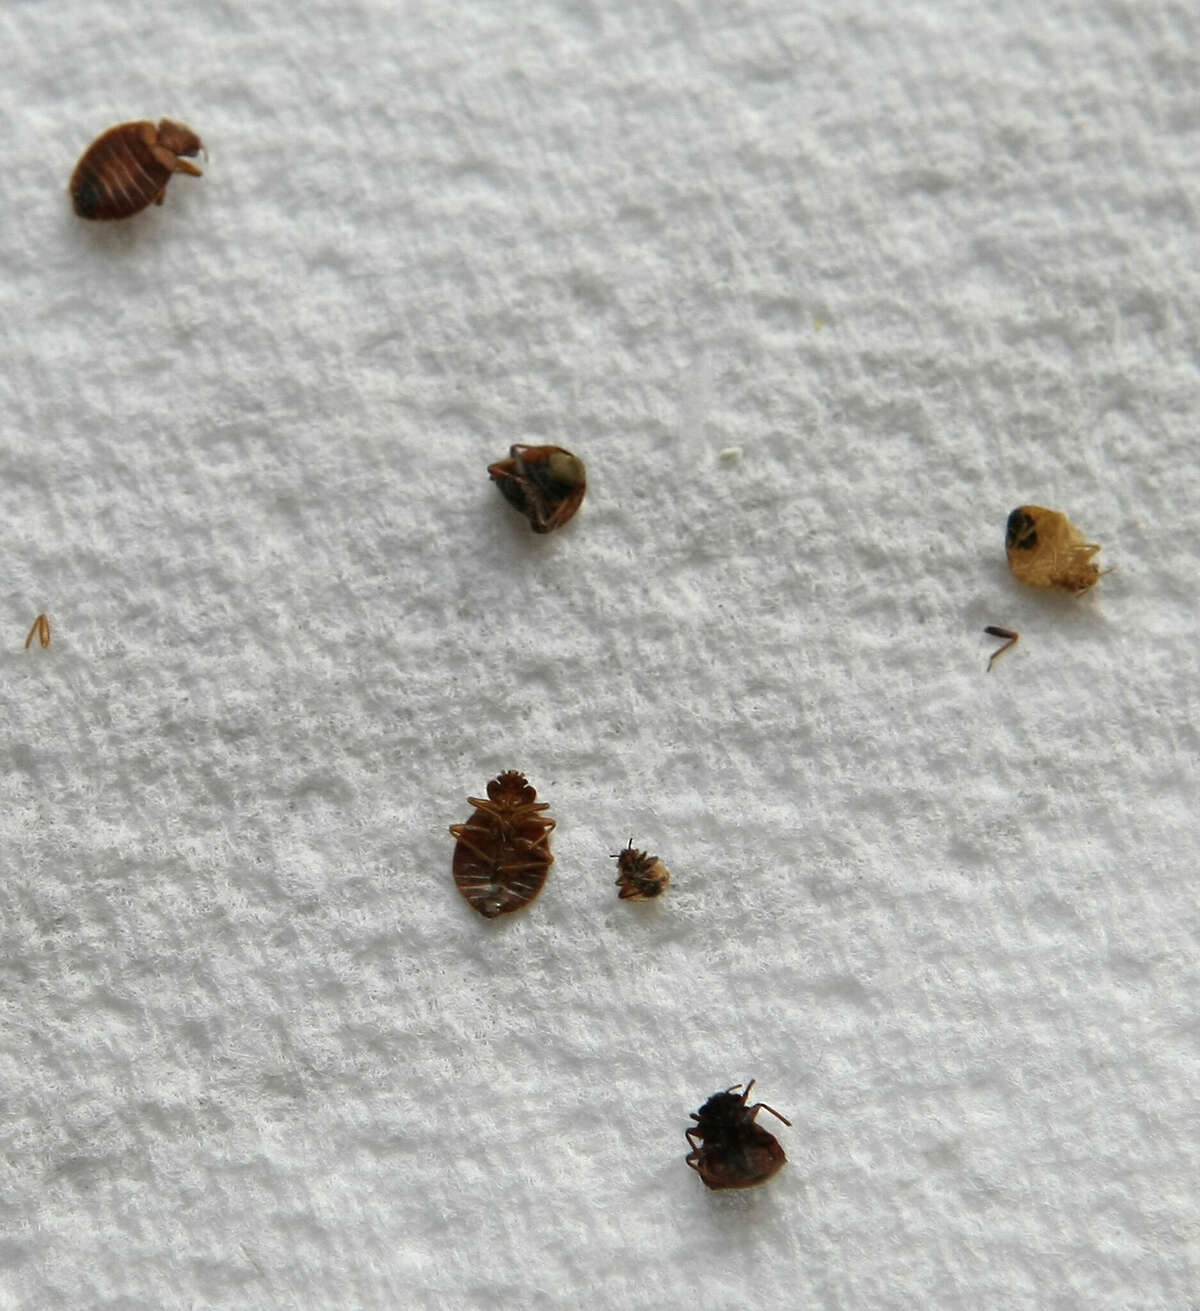 Contrary to popular belief, bed bugs are visible to the naked eye, according to an entomologist for the pest control company.